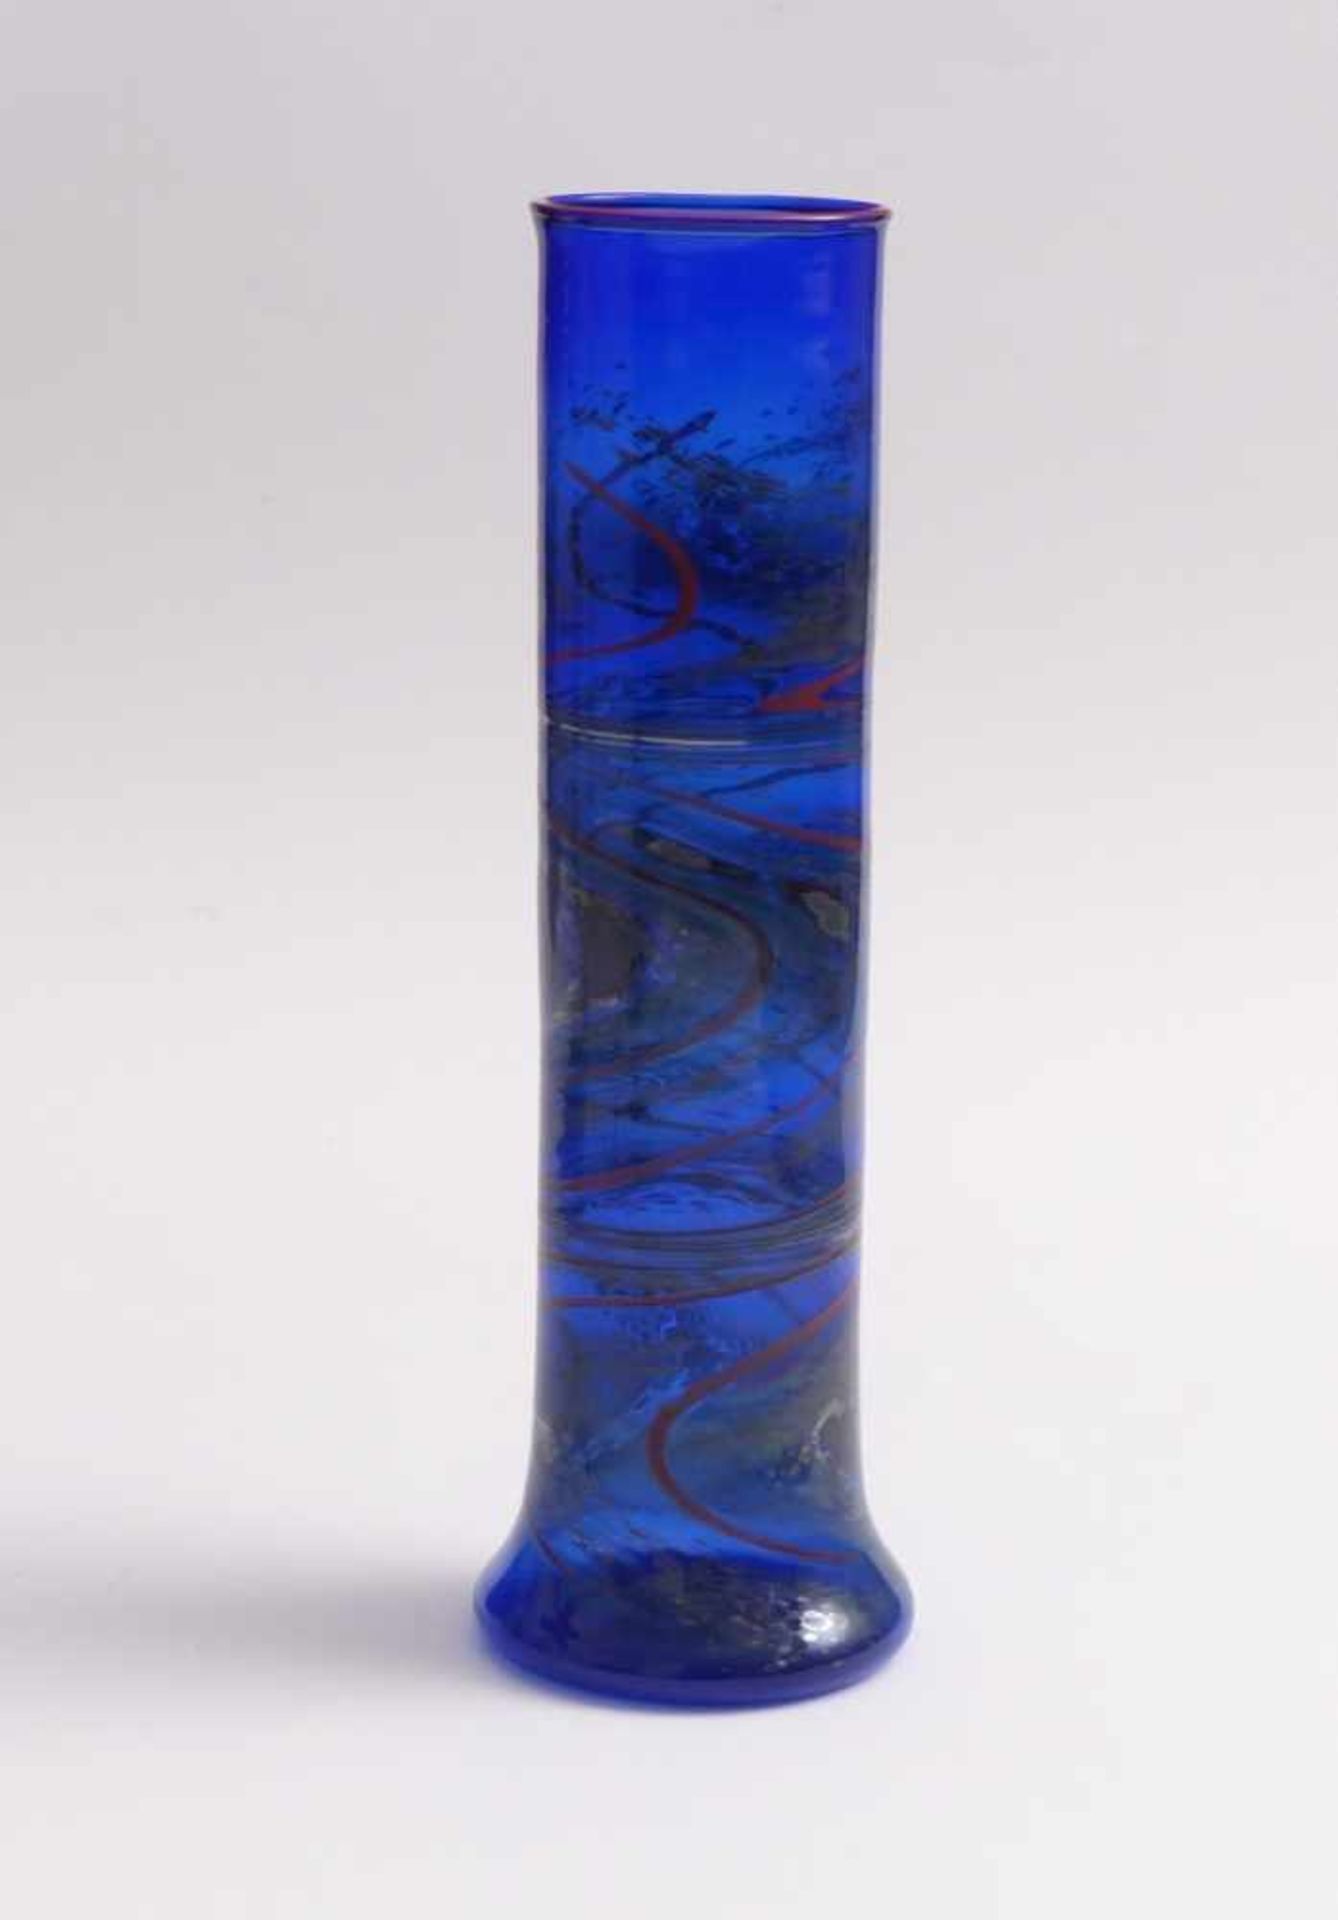 Bäz-Dölle, WalterVase(Lauscha 1935 born) Cobalt blue glass with wavy red threads and metal oxide